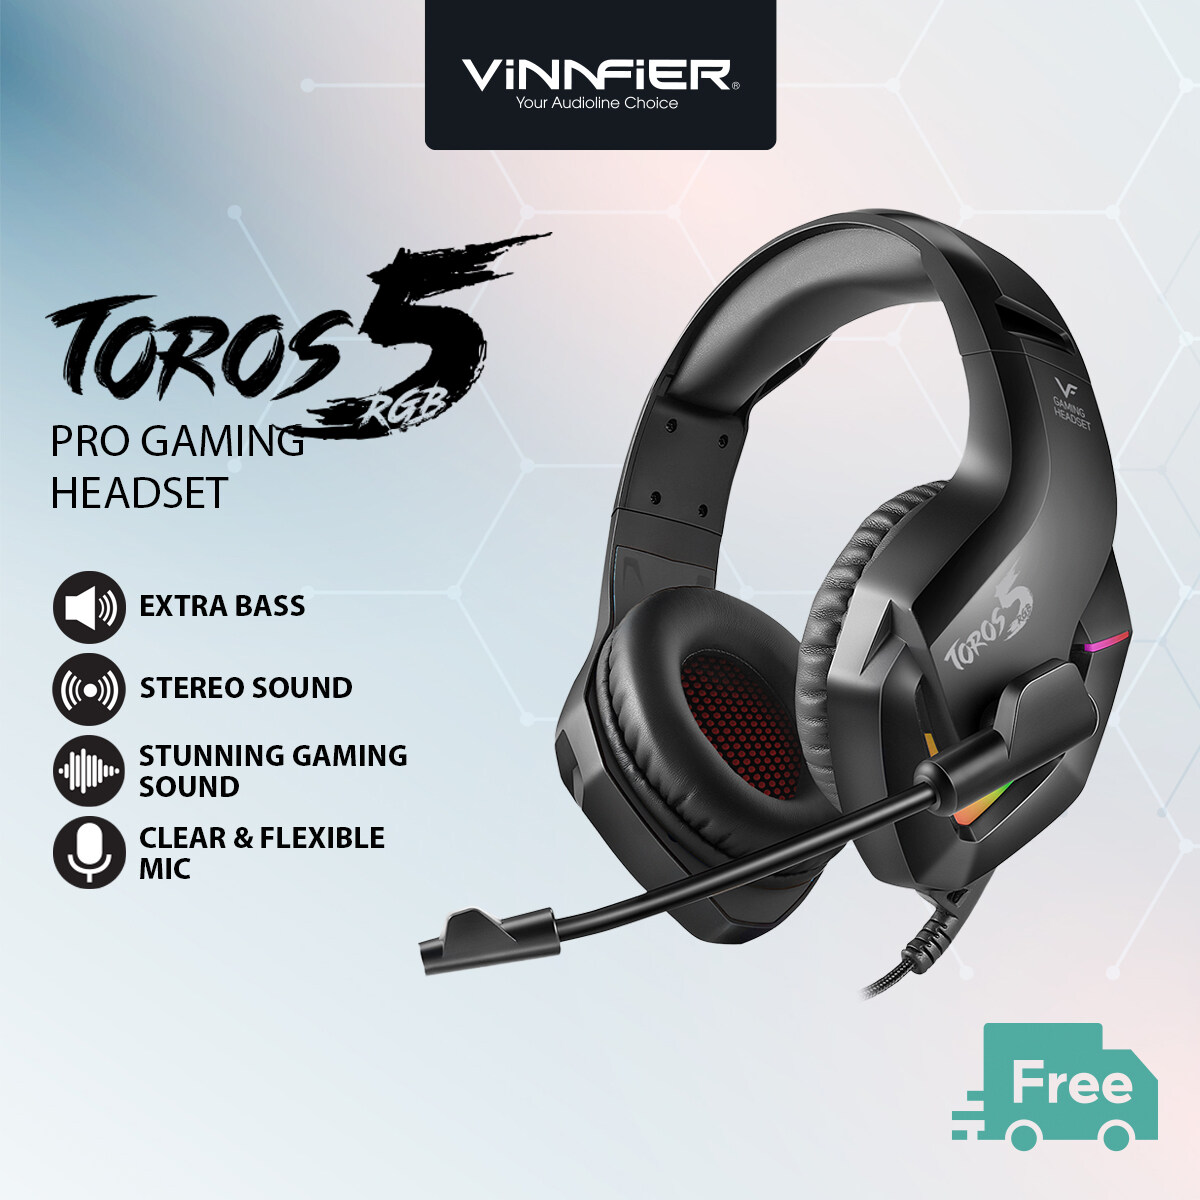 Vinnfier Toros 5 Pro Gaming Headset Extra Bass RGB LED Light Stereo Sound With Mic For Smartphones Tablets and Computer